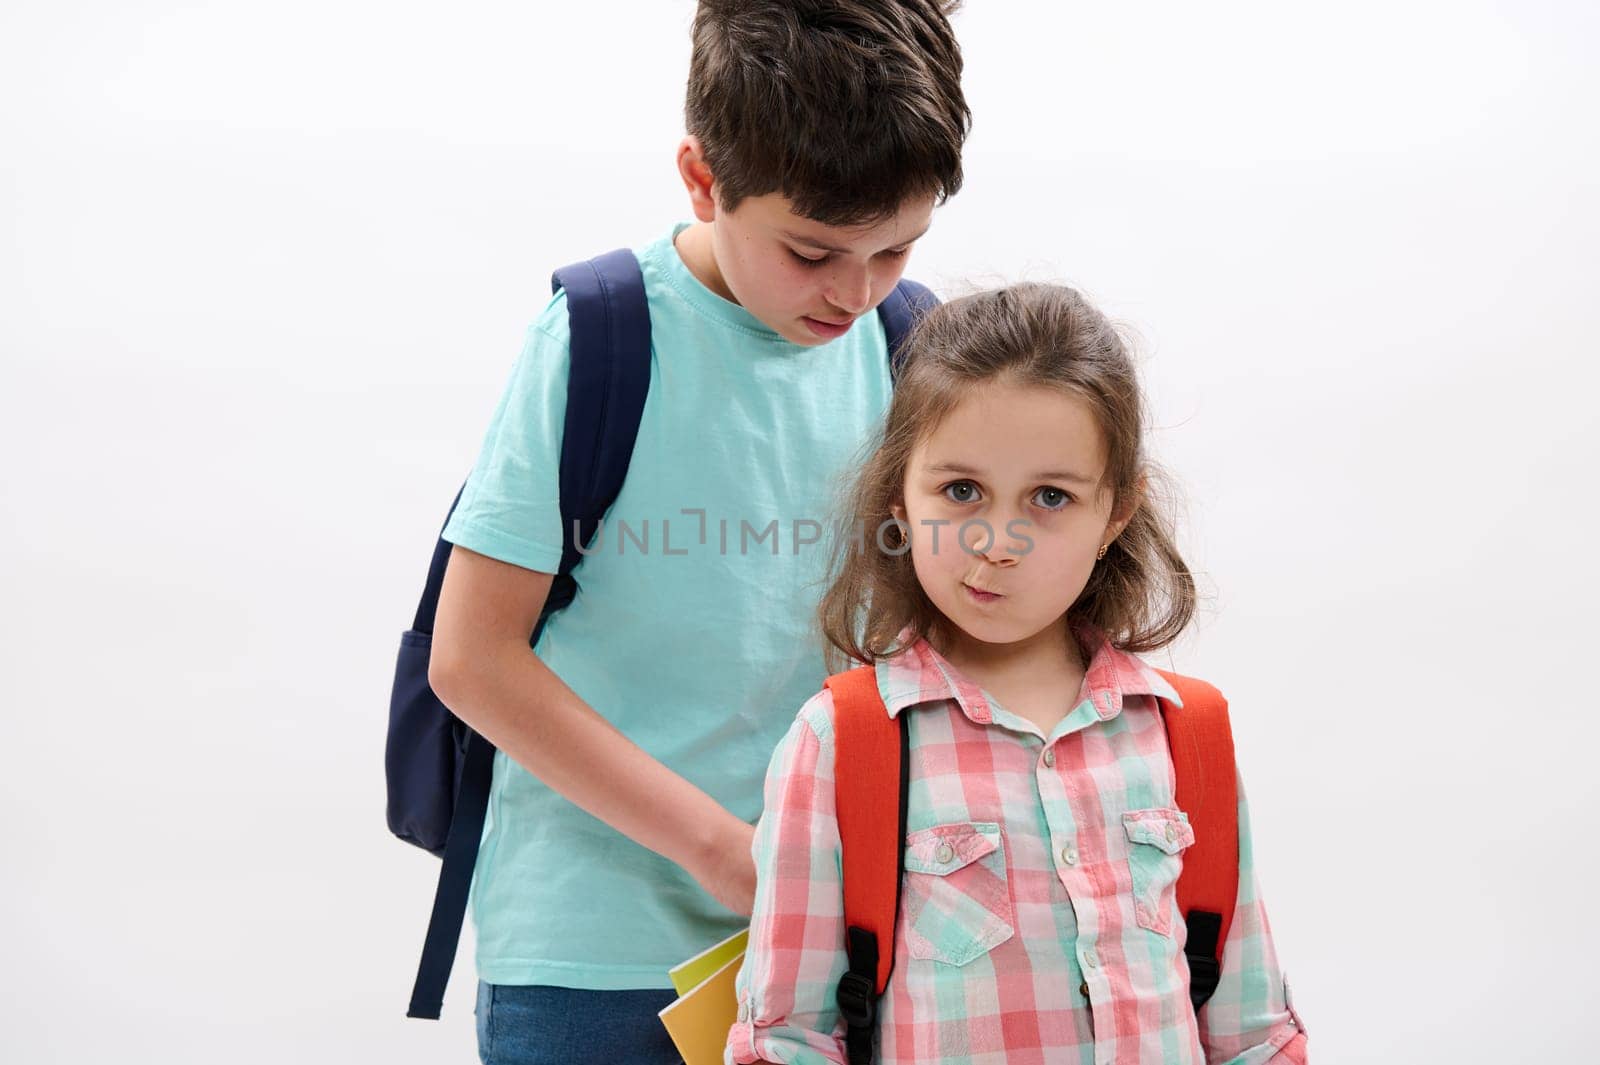 Lovely little child girl, mischievous preschooler kid makes faces looking at camera while her older brother puts workbooks inside her backpack, isolated over white background. Back to school concept